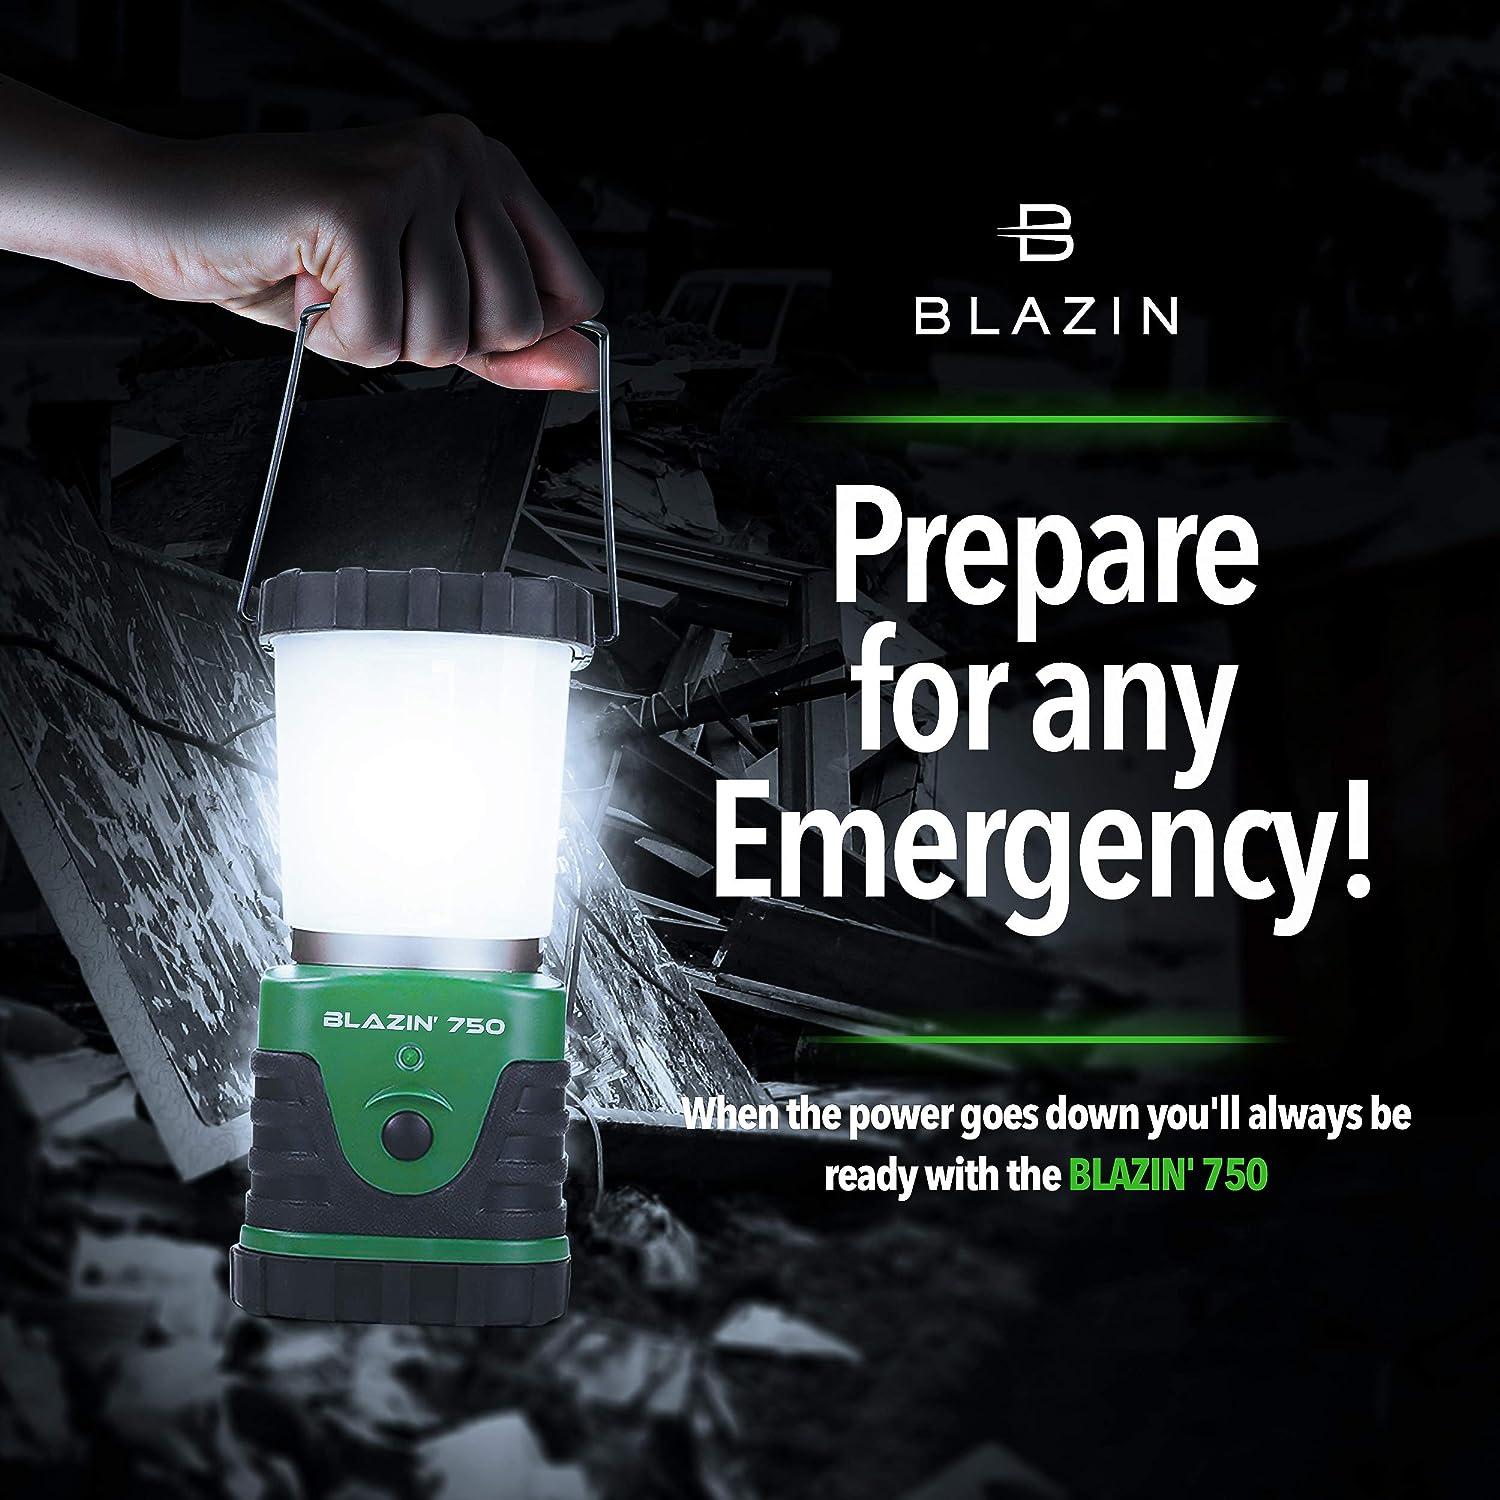 Blazin Fireball, Brightest Dimmable LED Lantern Rechargeable USB, 1000  Lumen Storm, Hurricane, Emergency Light, Power Outage